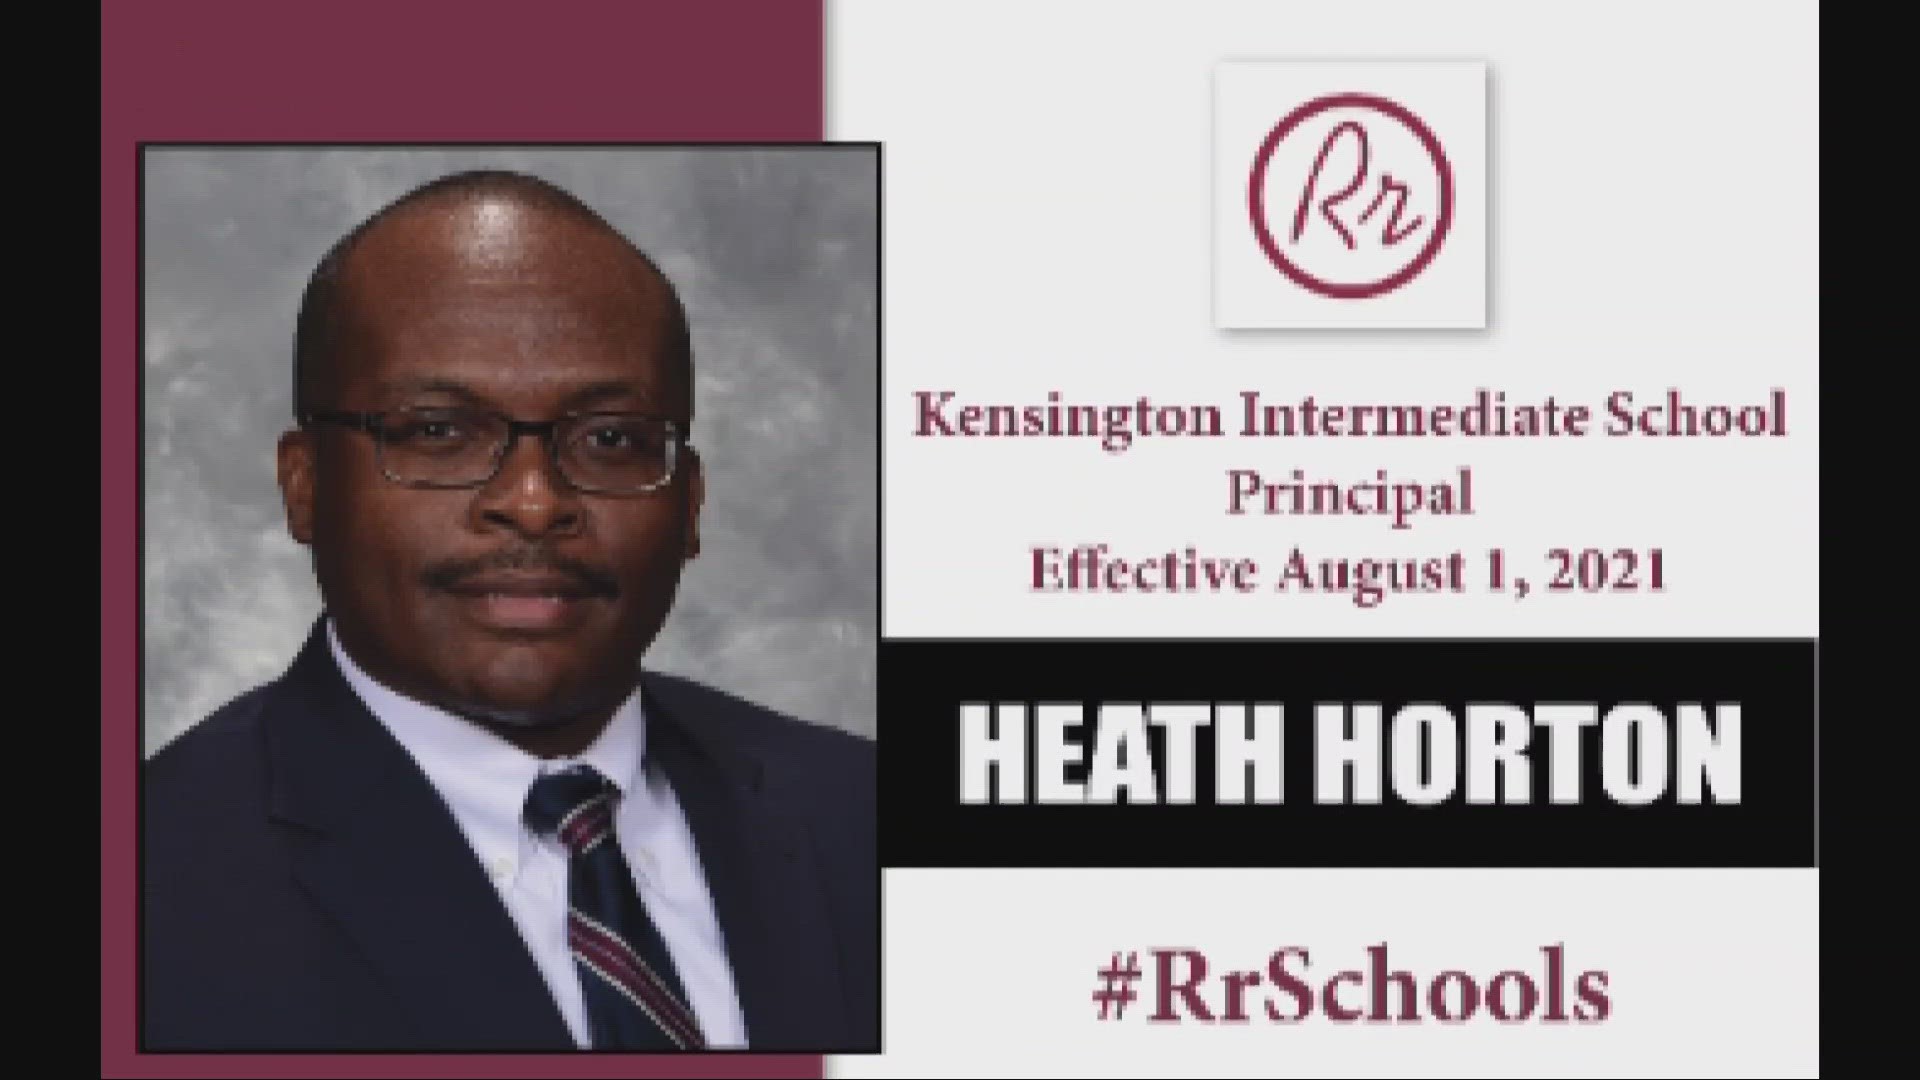 Officials say the matter involves an unspecified complaint against Dr. Heath Horton brought by the parent of a former Rocky River High School student.